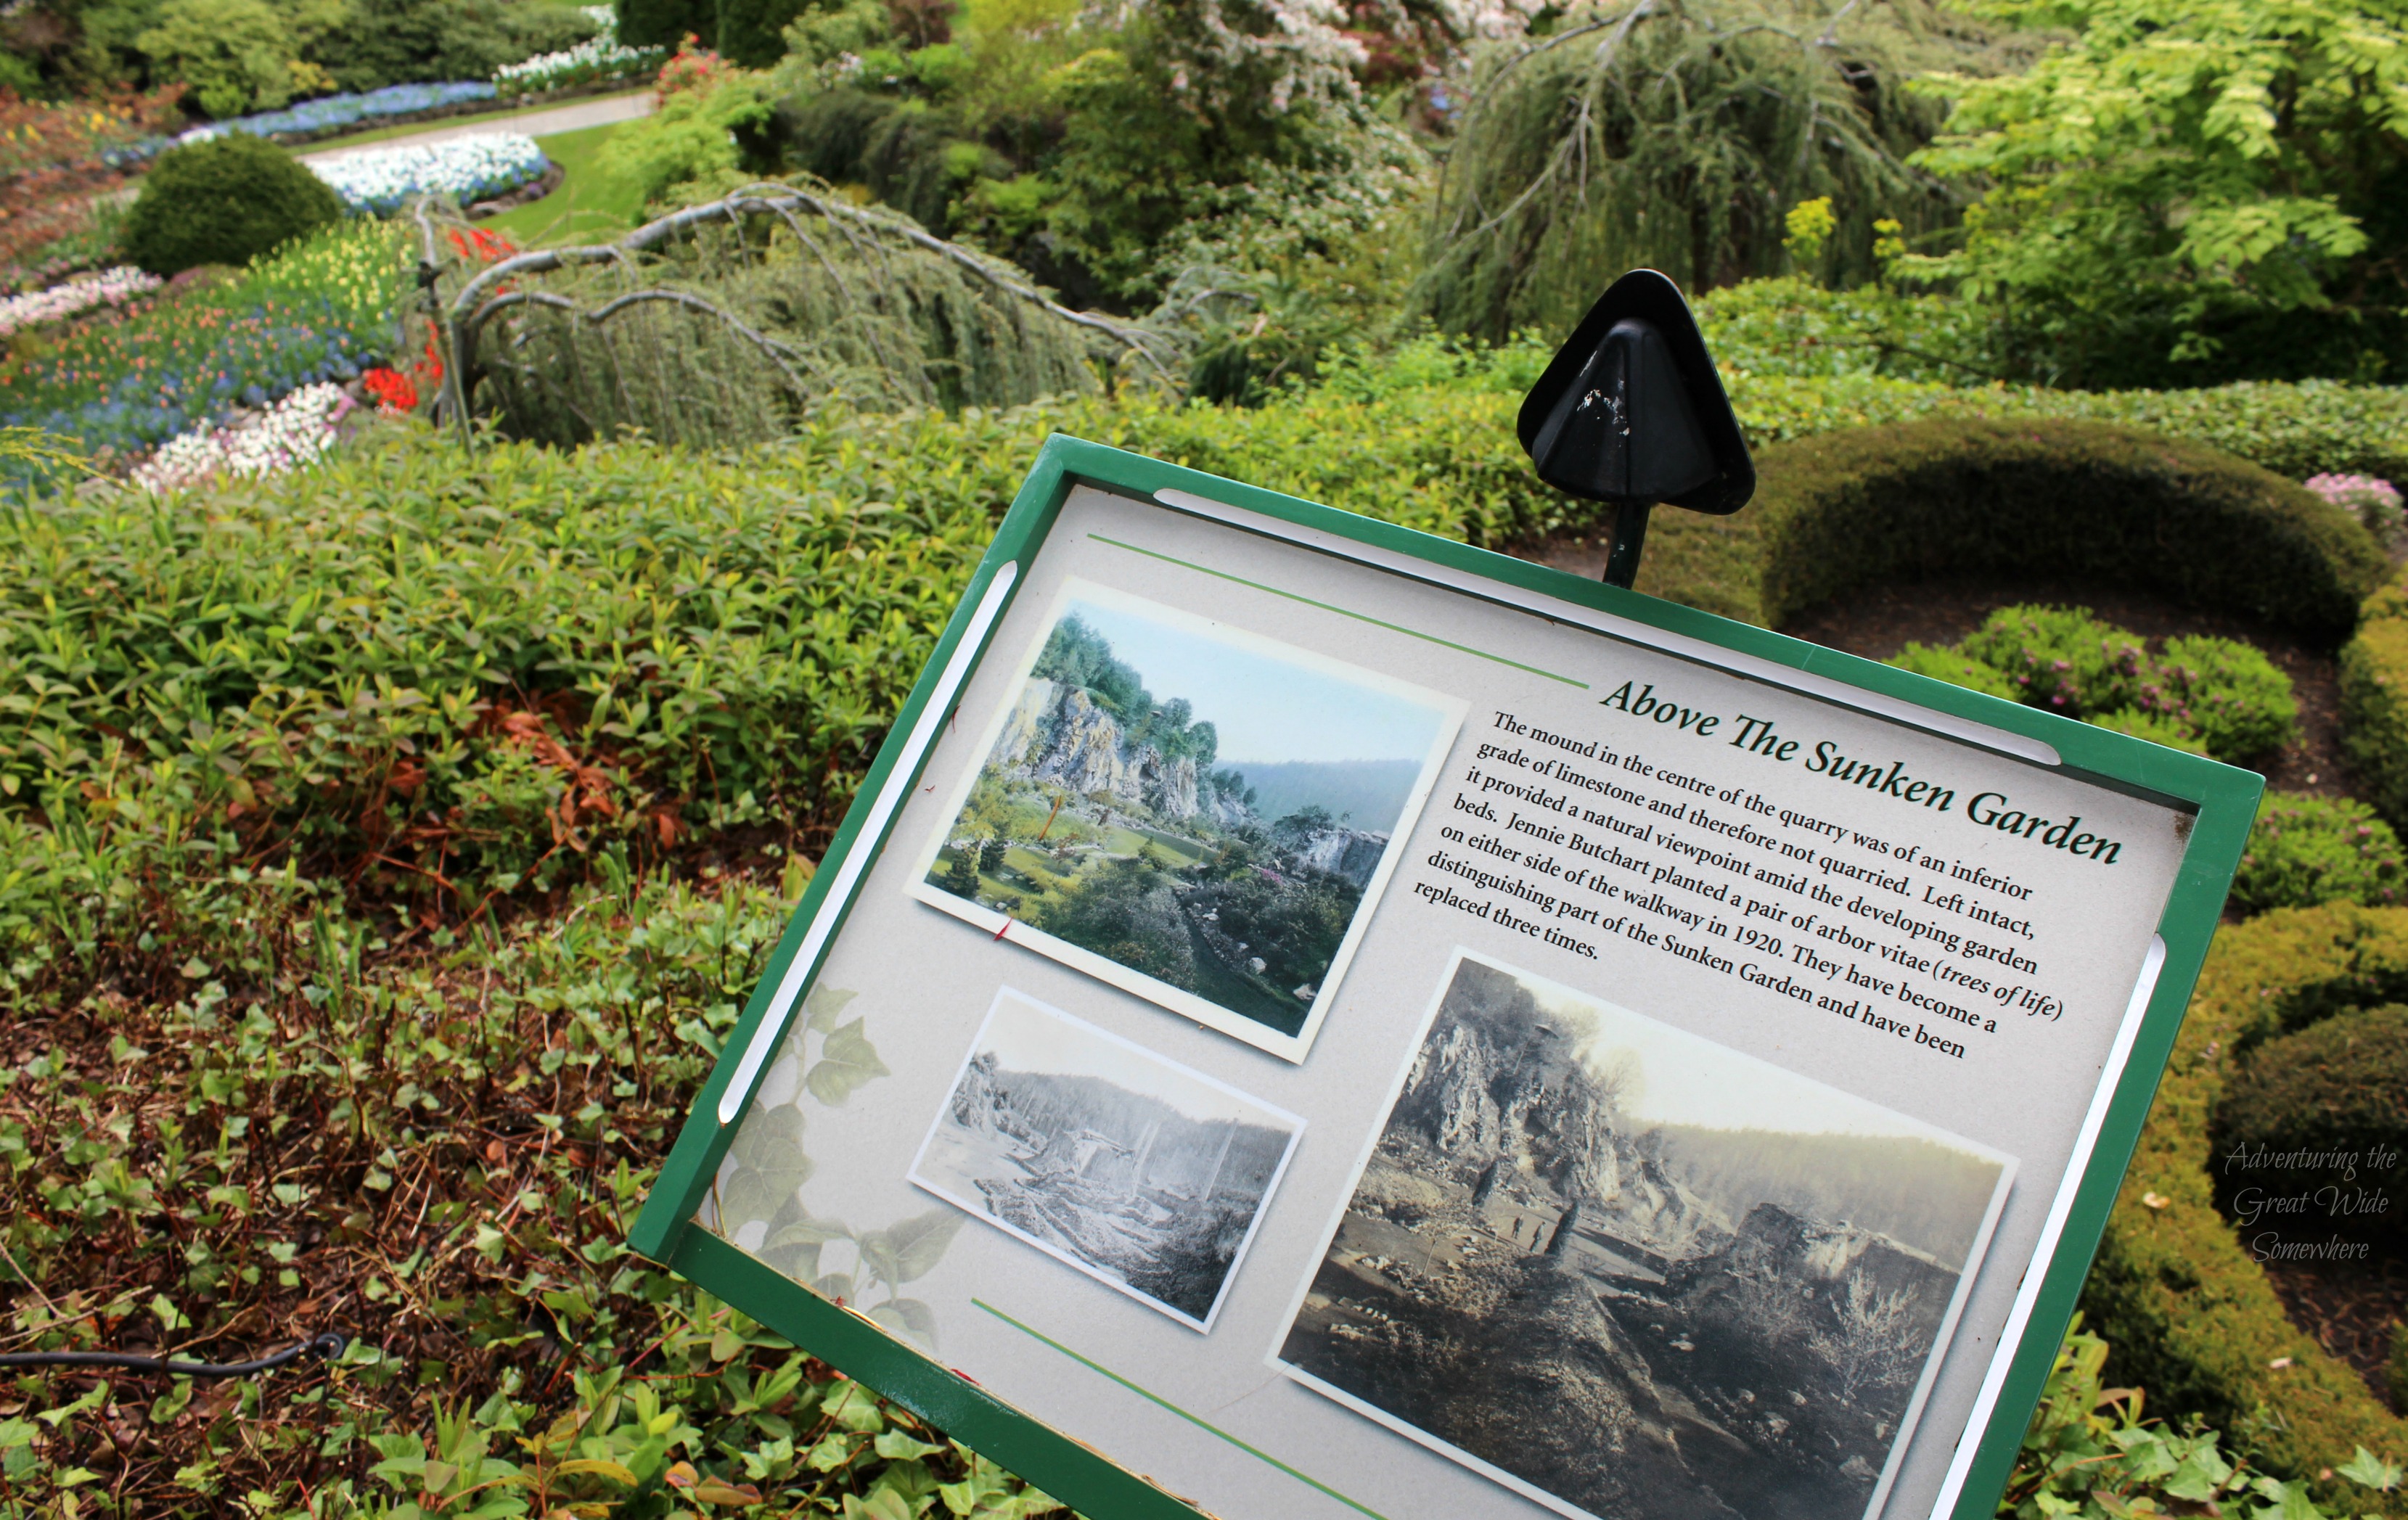 Informational Sign about the Viewpoint in the Butchart Gardens Sunken Garden